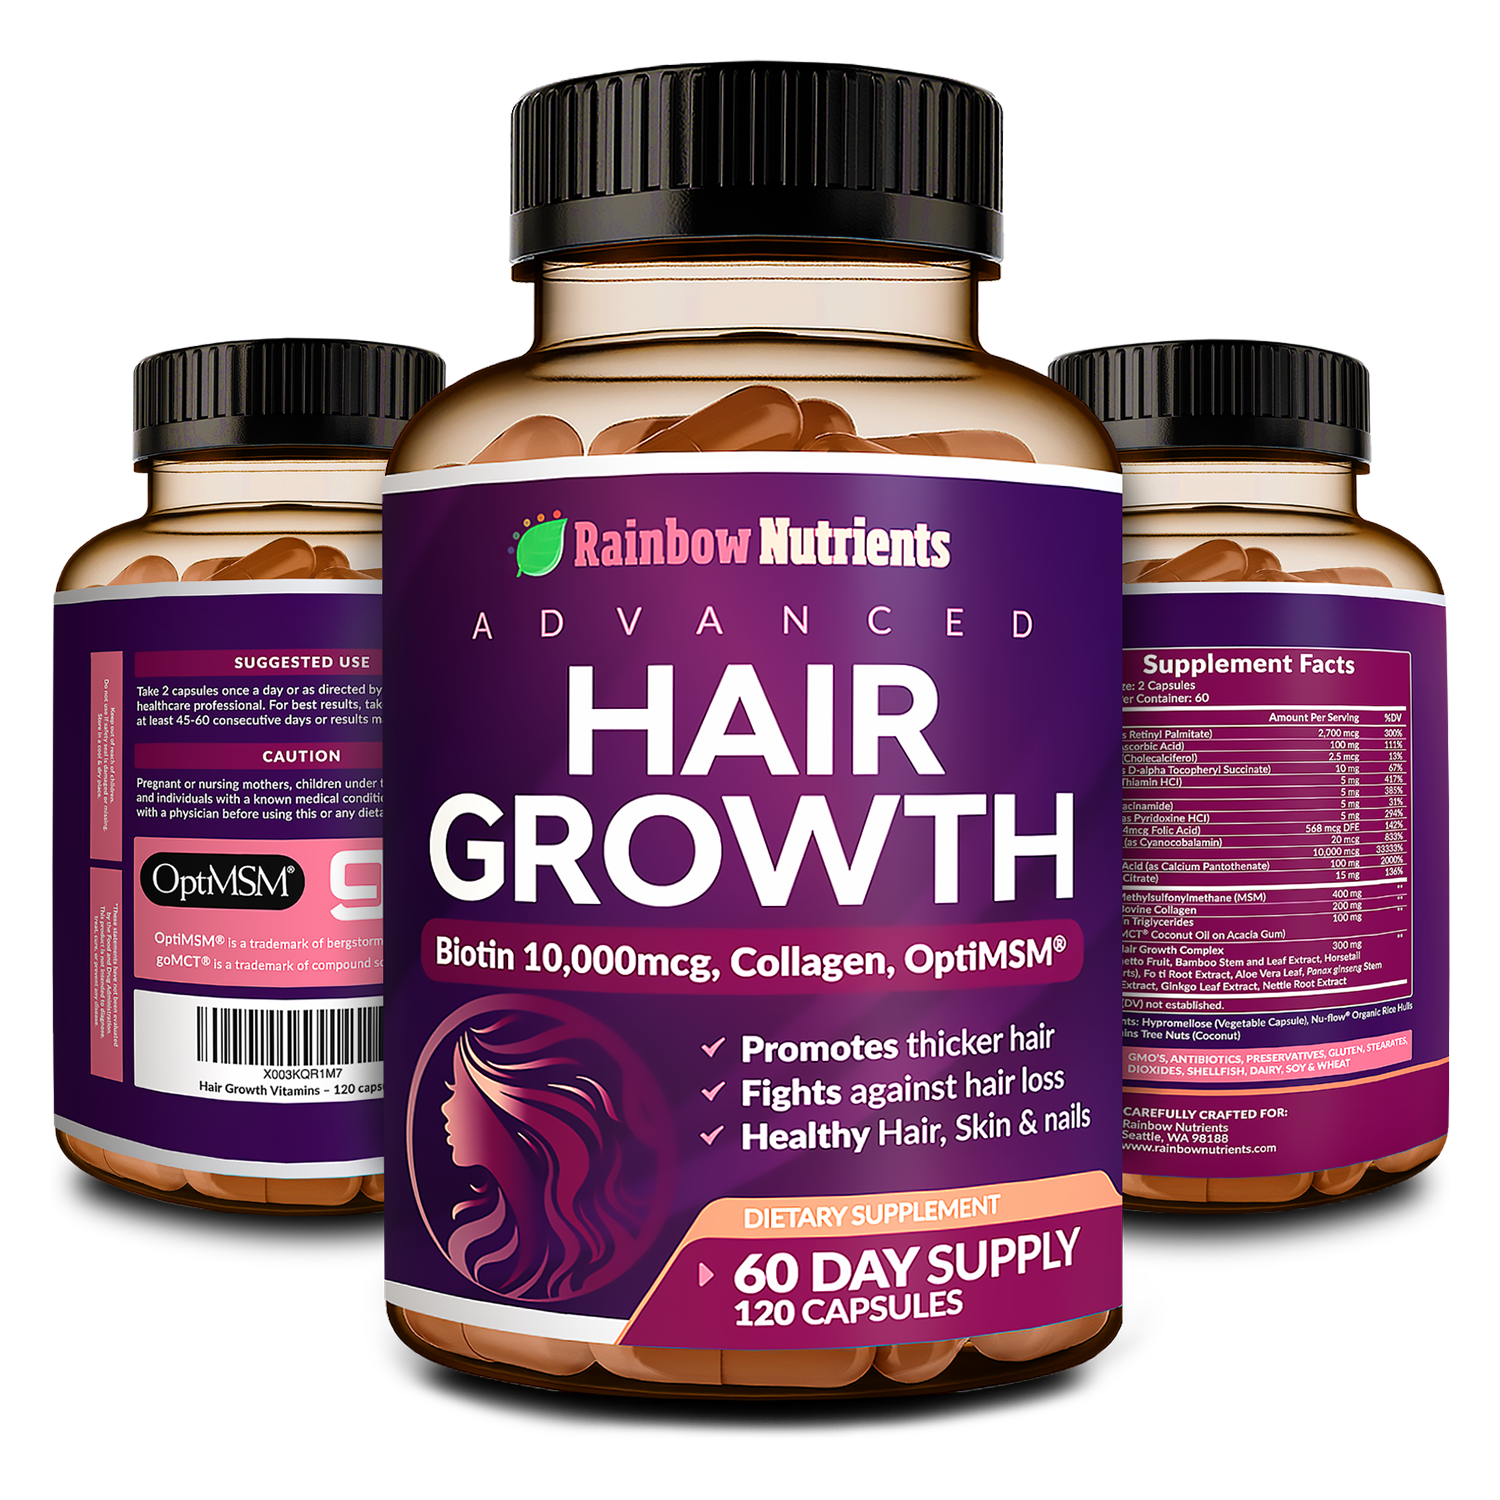 Hair Growth bottle from all sides